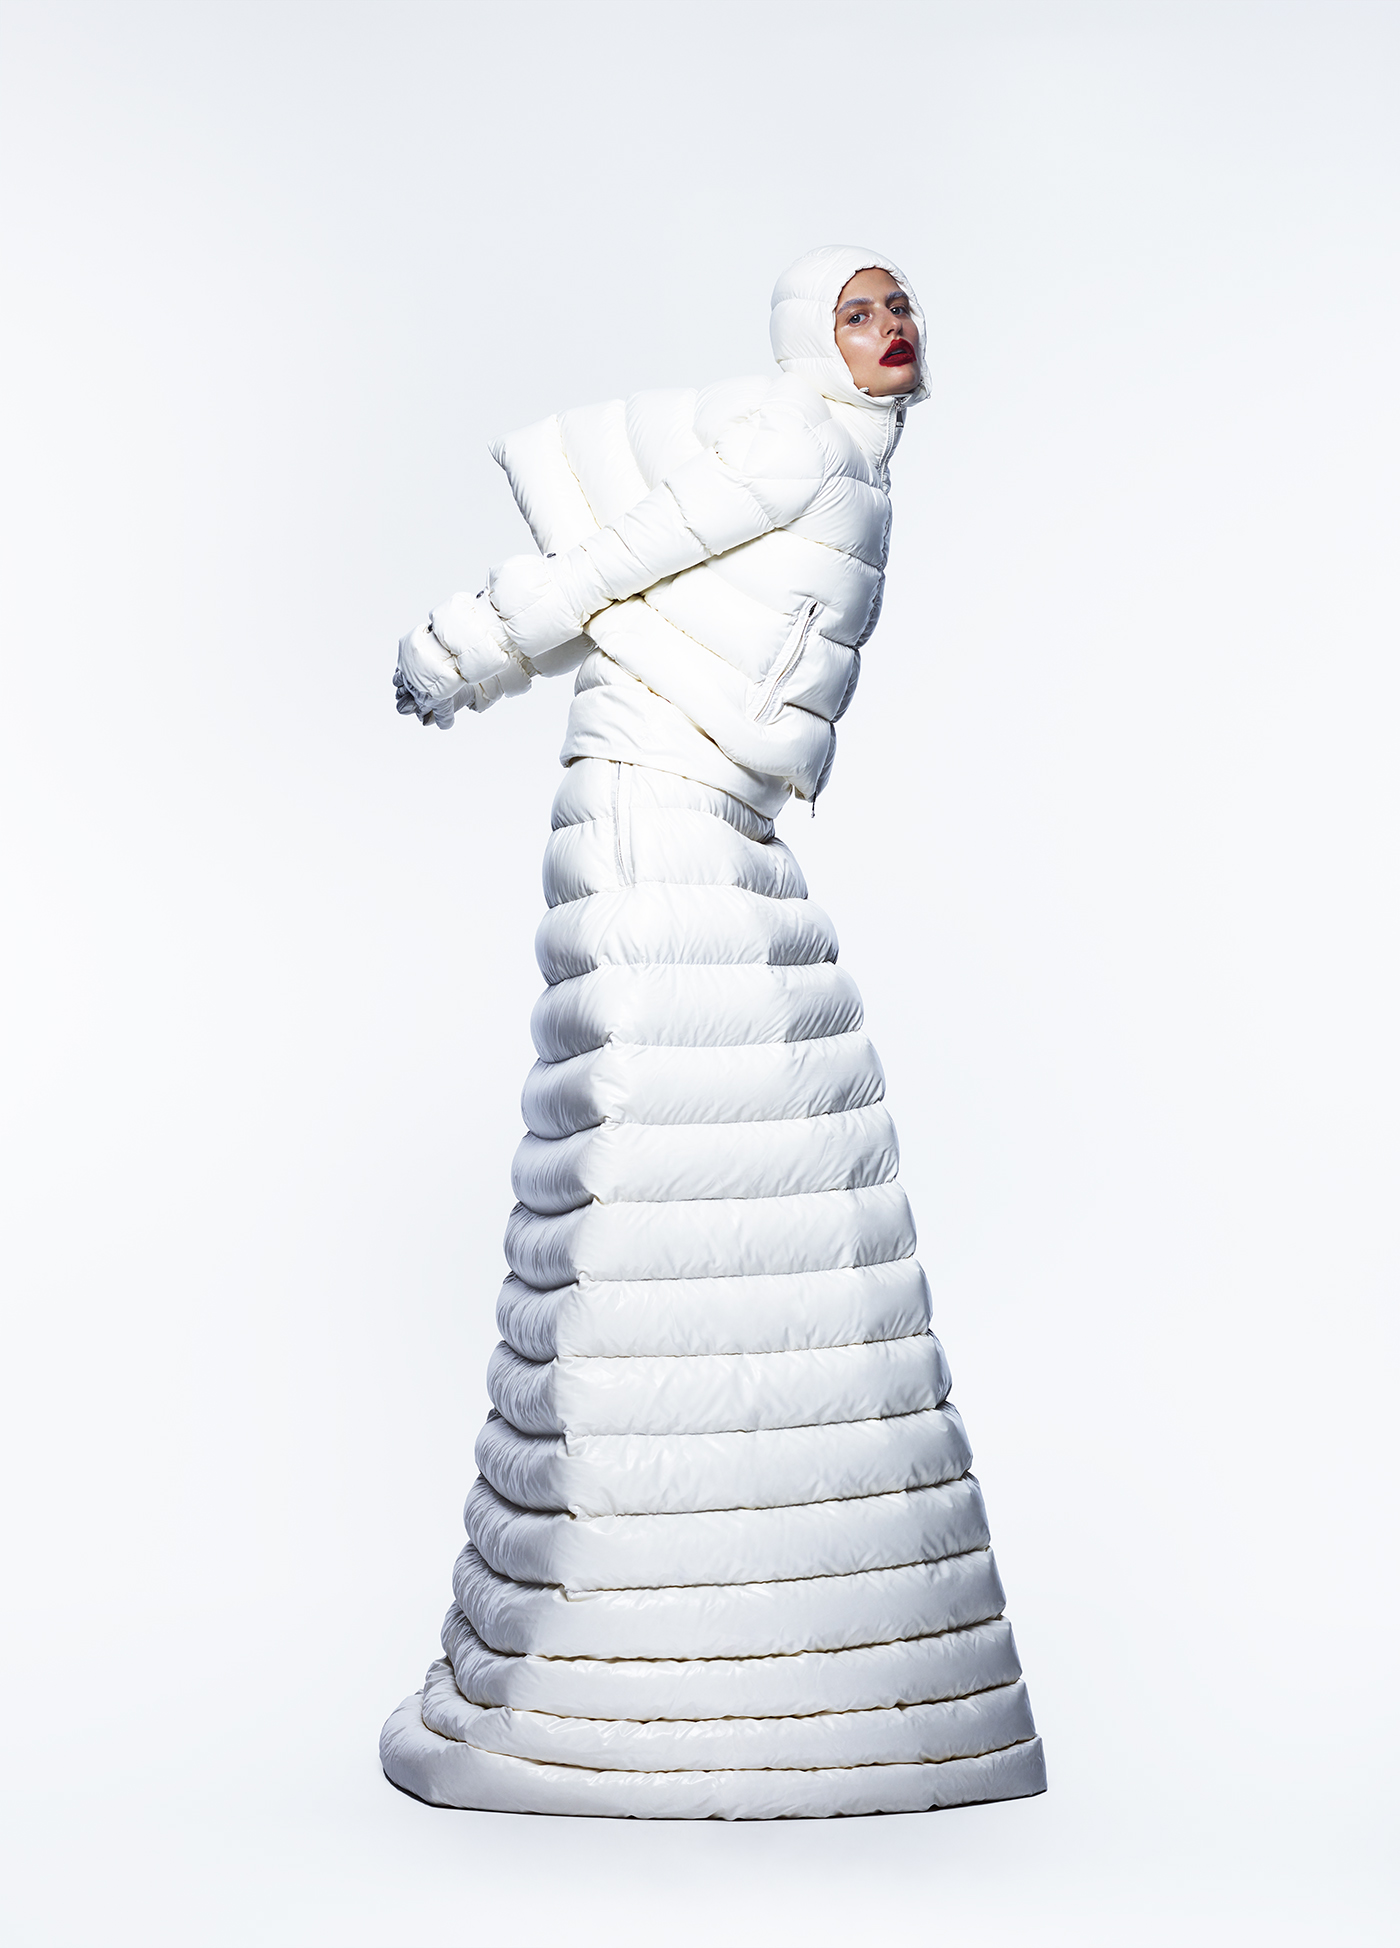 All clothing by Moncler 1 Pierpaolo Piccioli.